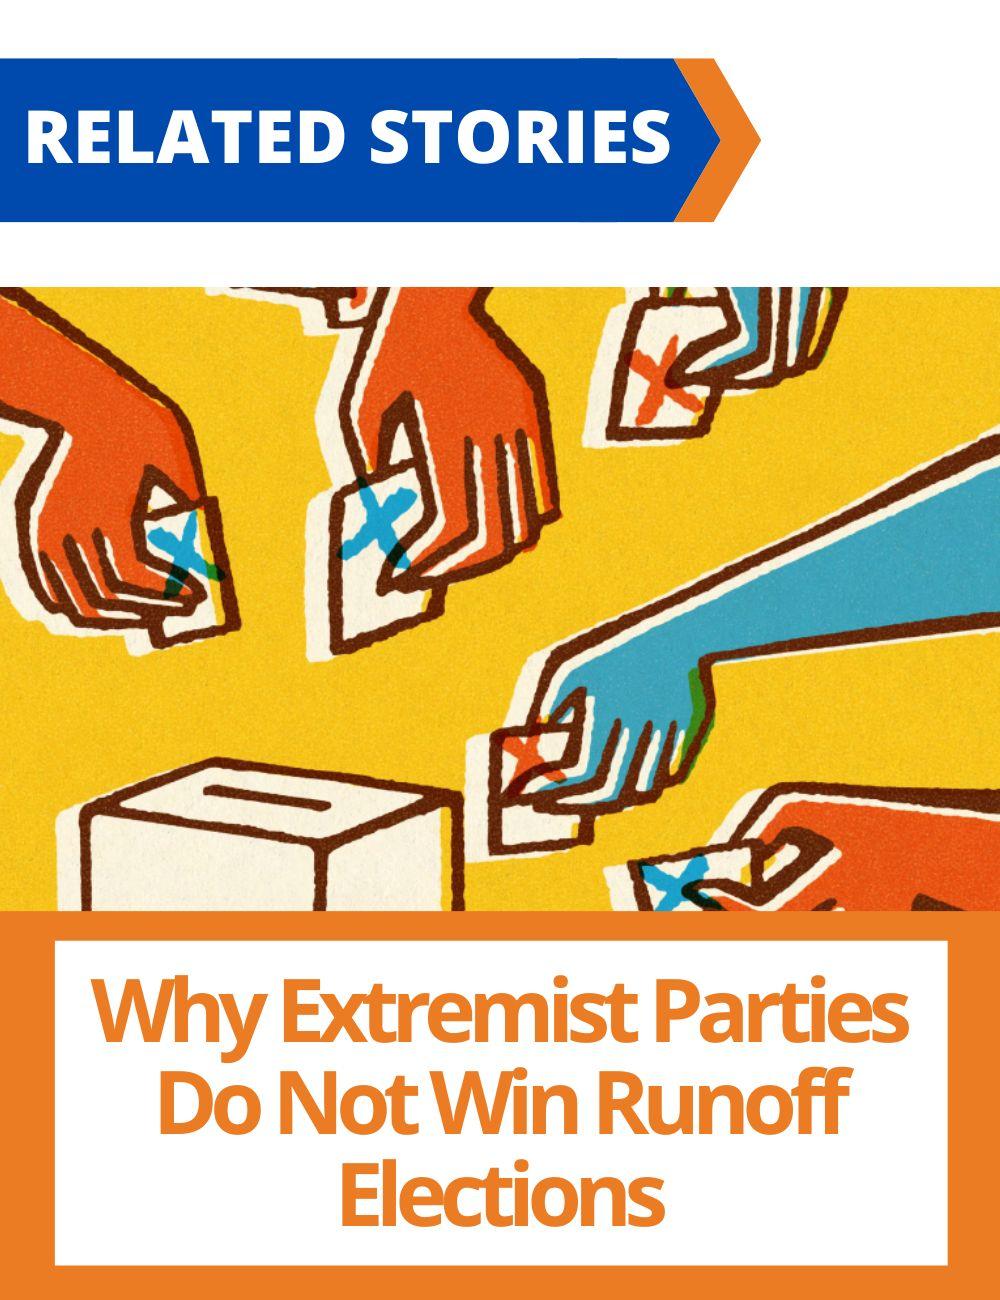 Link to related stories. Image: voting. Story headline: Why Extremist Parties Do Not Win Runoff Elections